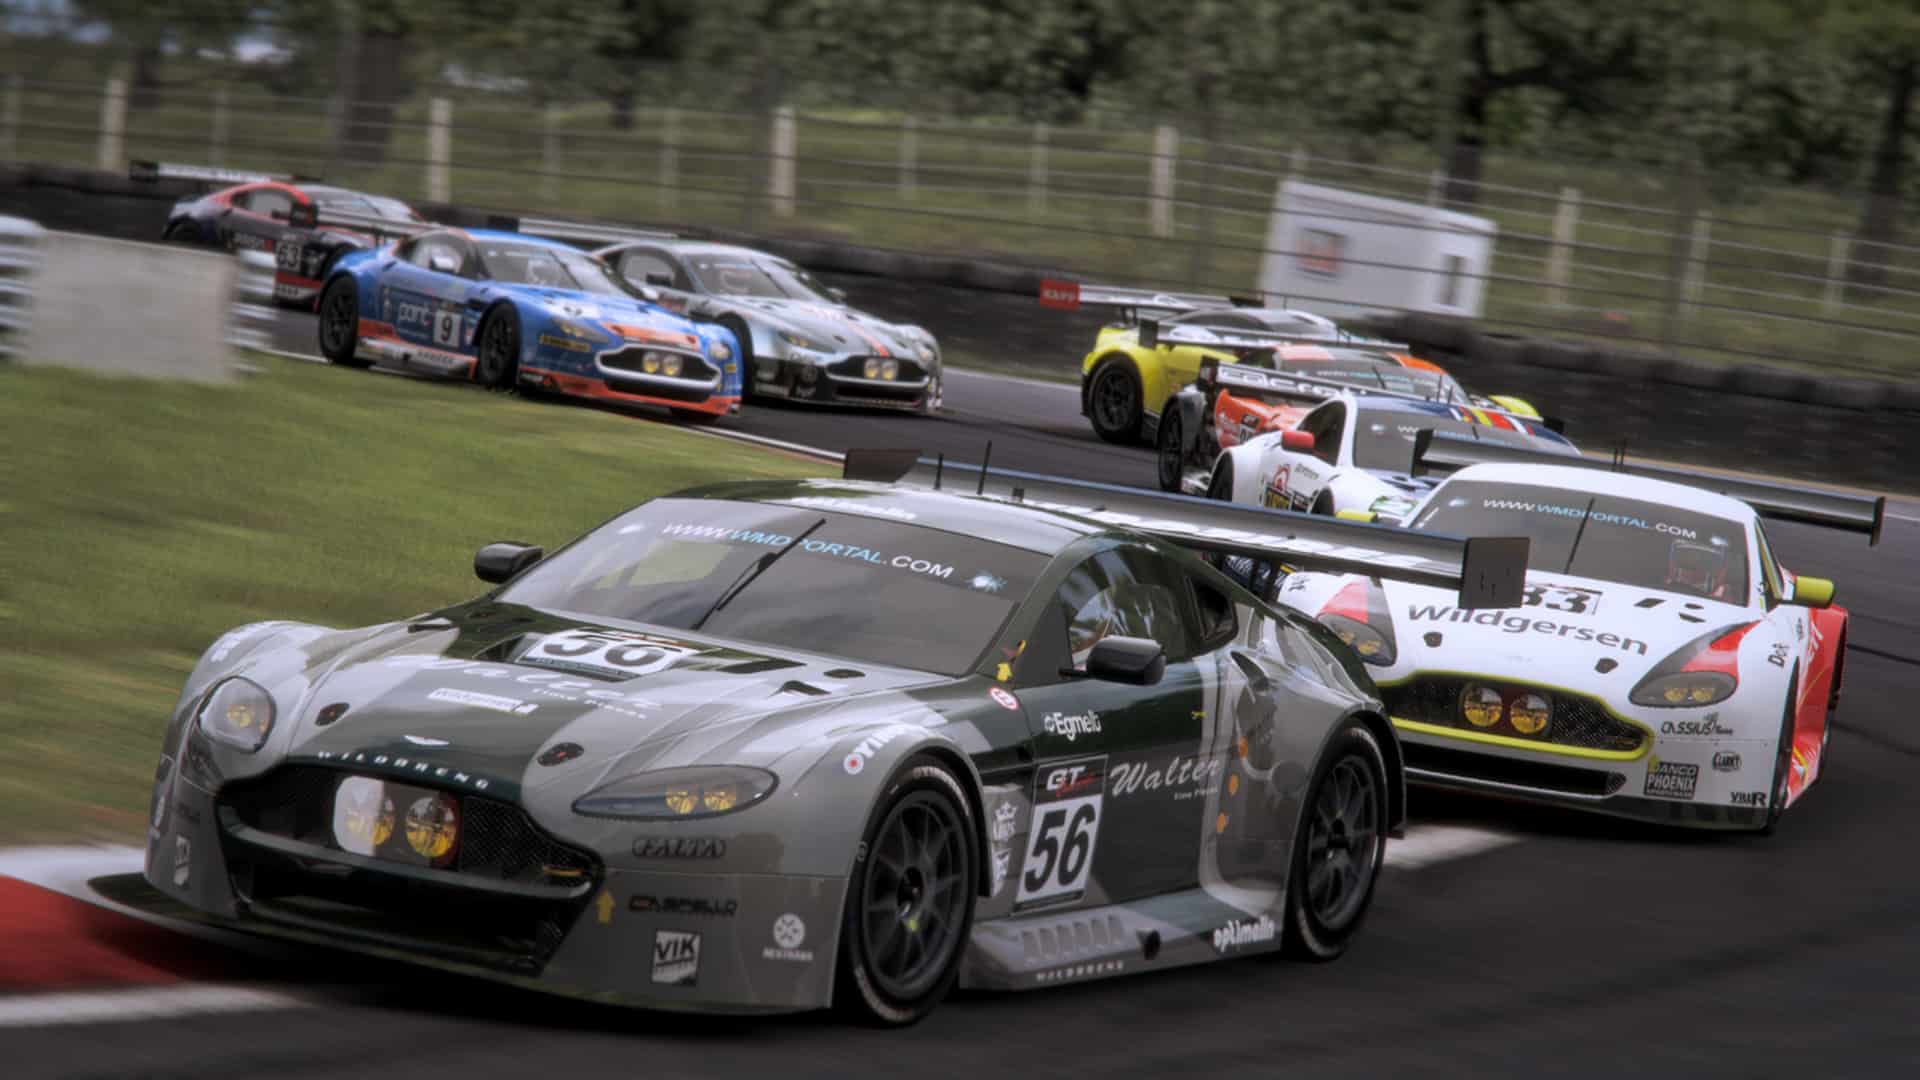 Report - The Project CARS series is dead